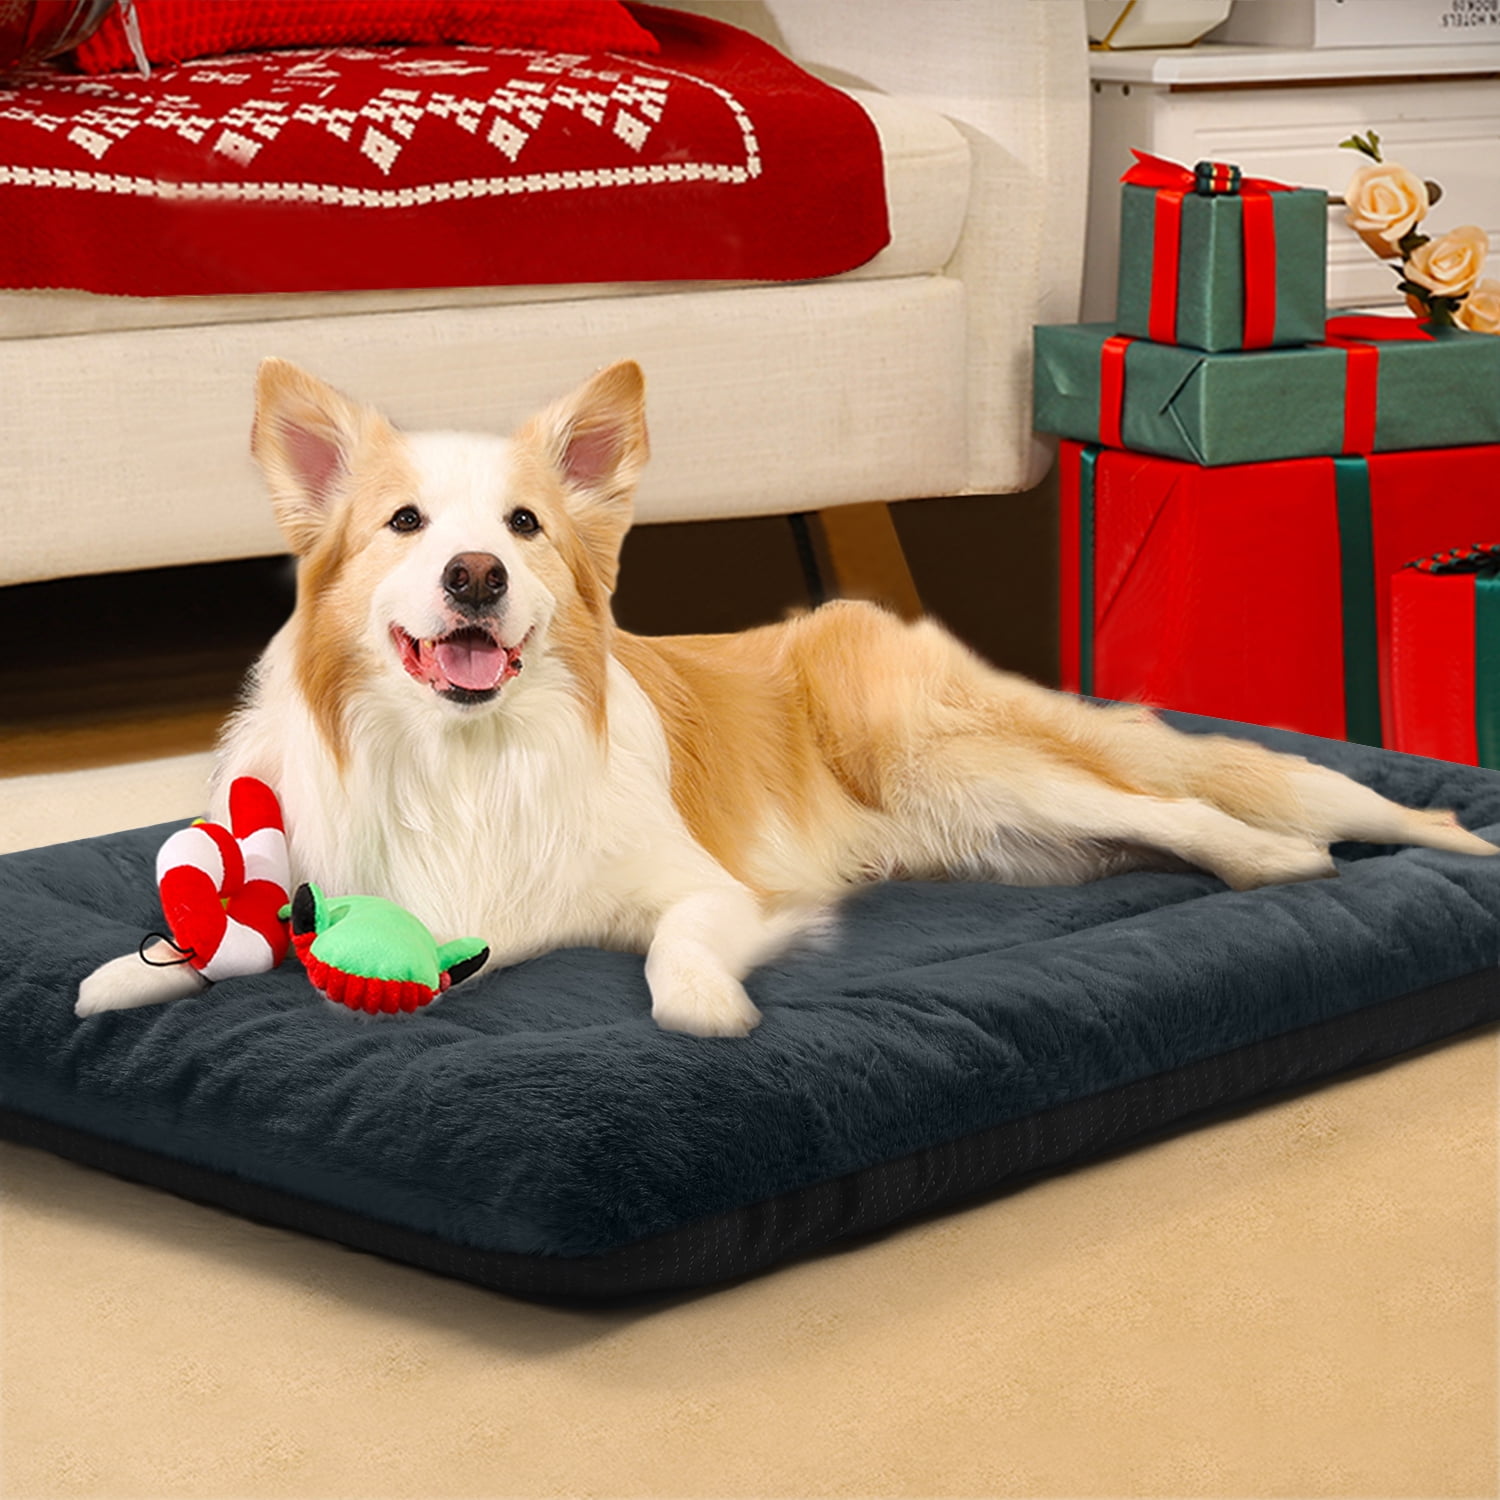 Dog Bed - Charcoal Infused Foam Pet Bed With Plush Cover - Egg-crate Style Floor  Mat With Nonslip Base For Dogs Up To 65lbs By Petmaker (brown) : Target